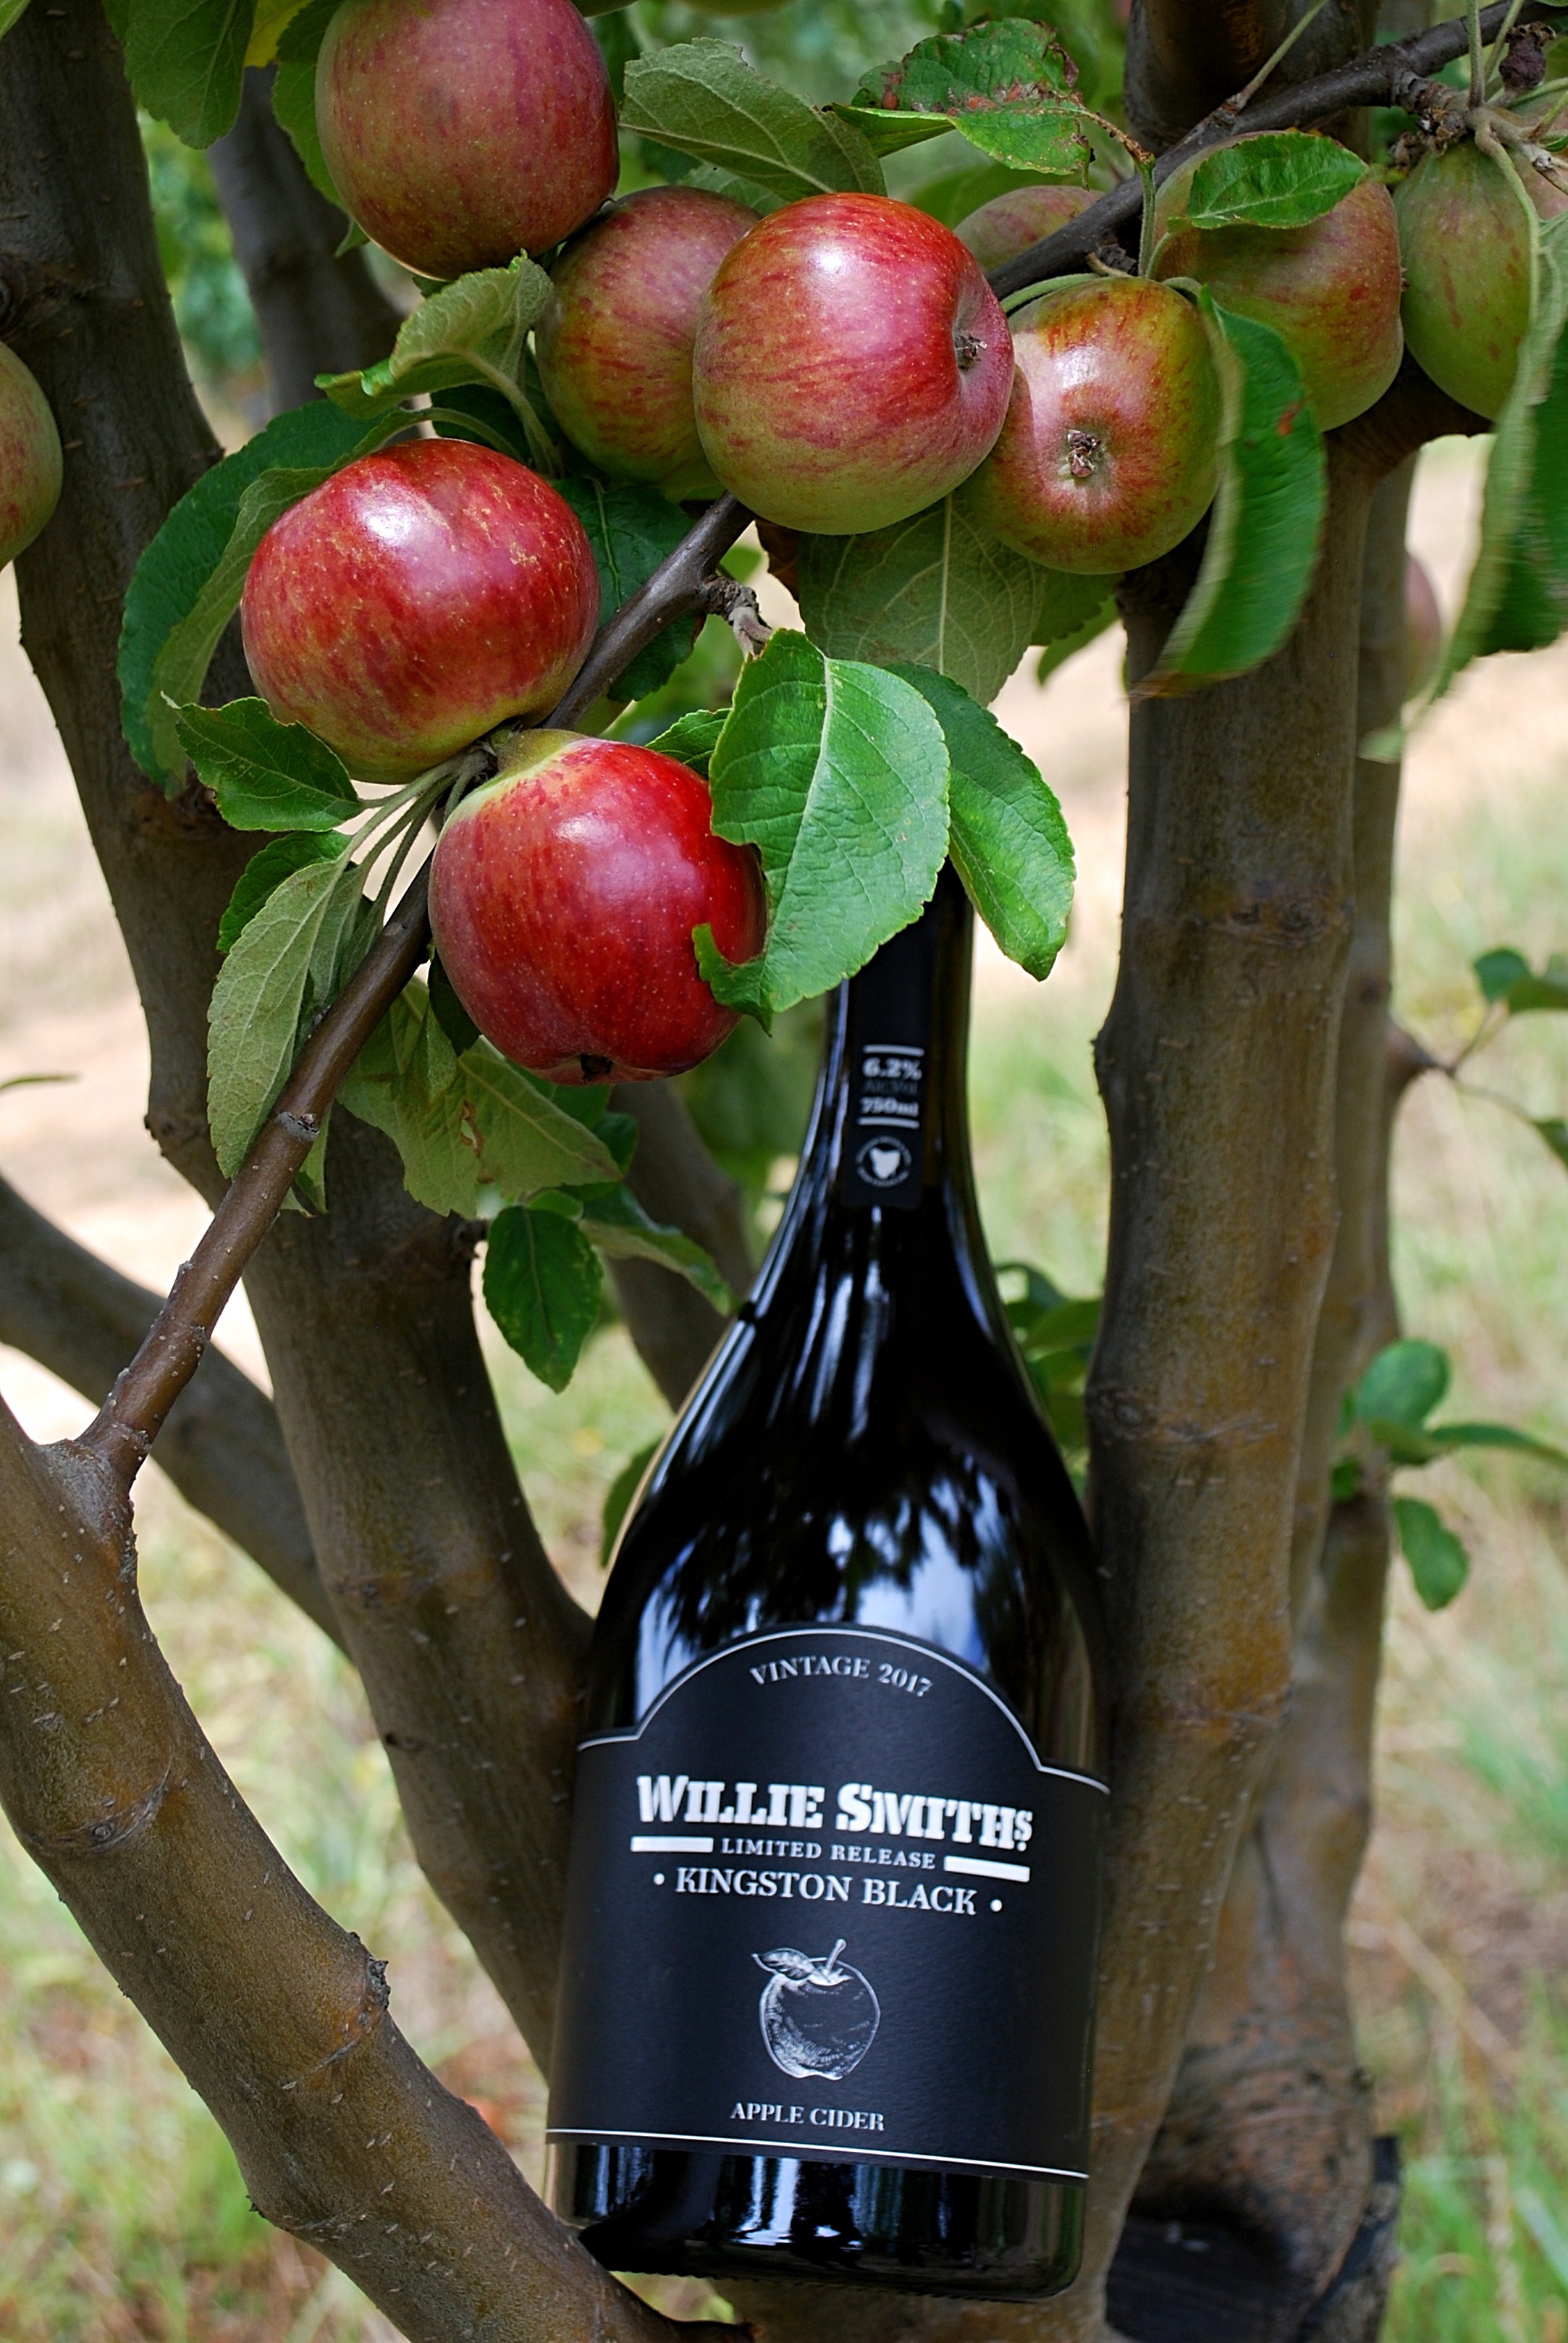 Willie Smith's limited release Kingston Black cider 